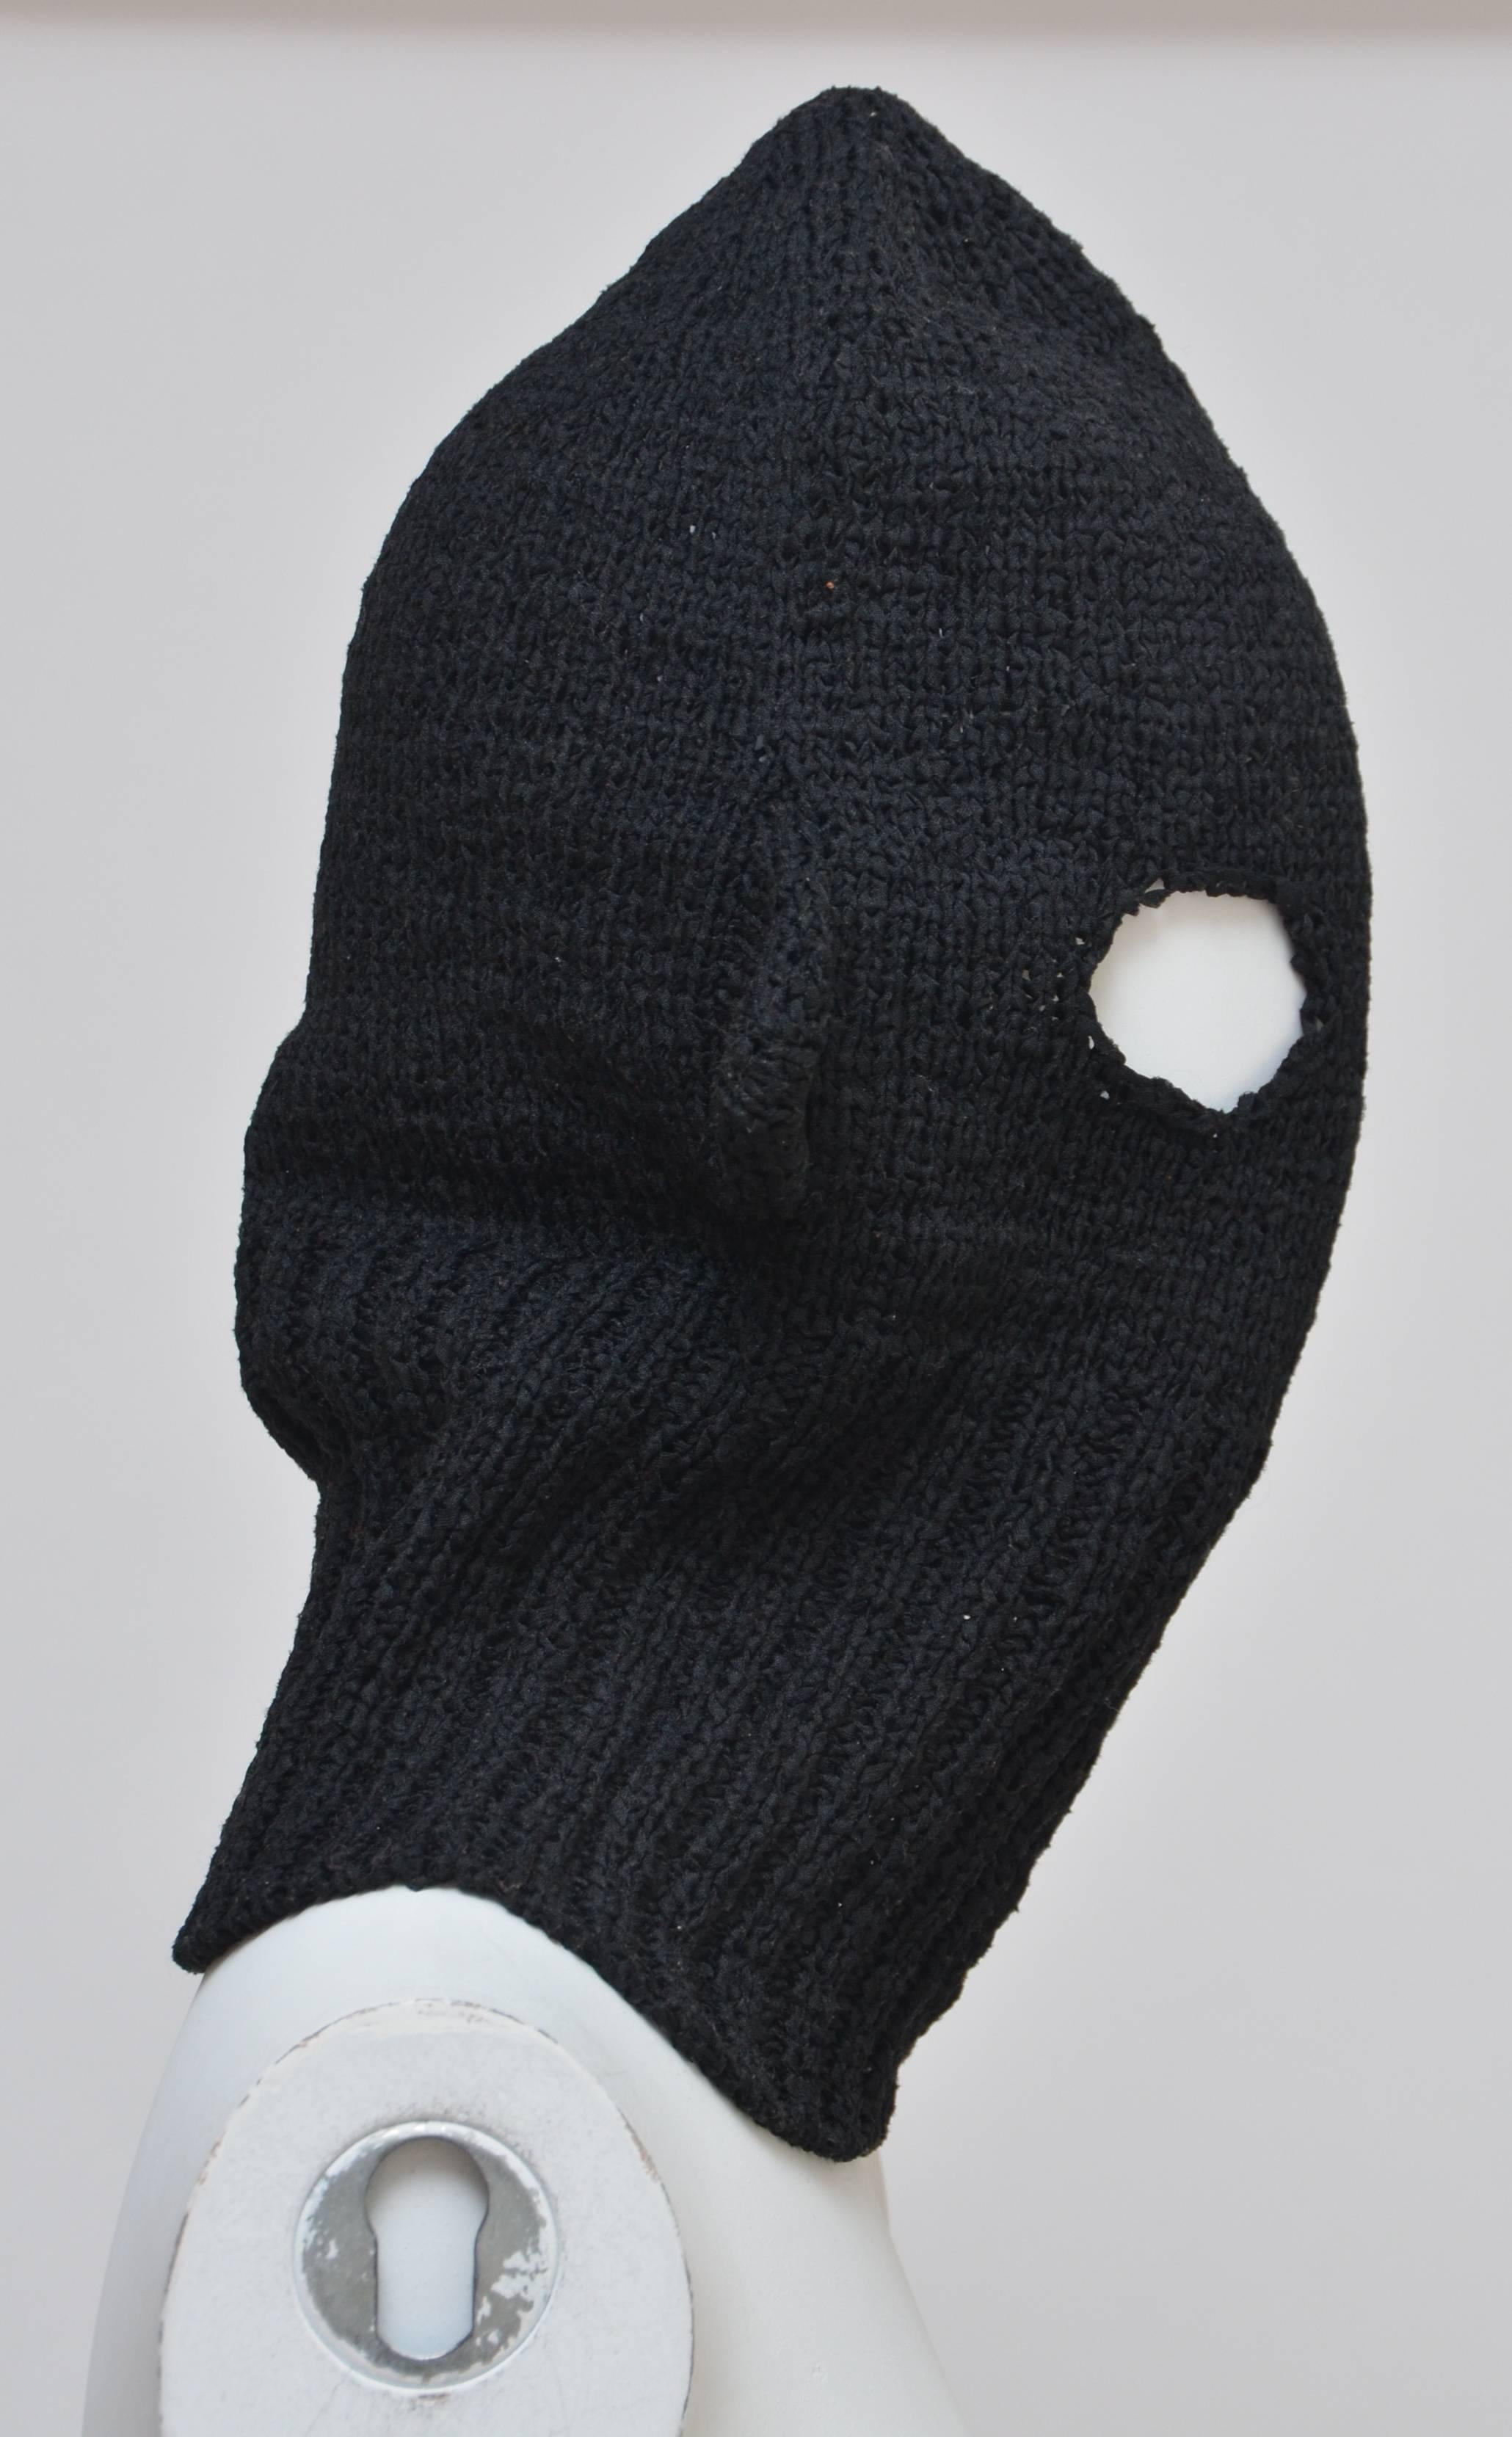 Issey Miyake vintage Pleats Please balaclava hat with ears.
Excellent vintage condition.
Made in Japan.

Final Sale.